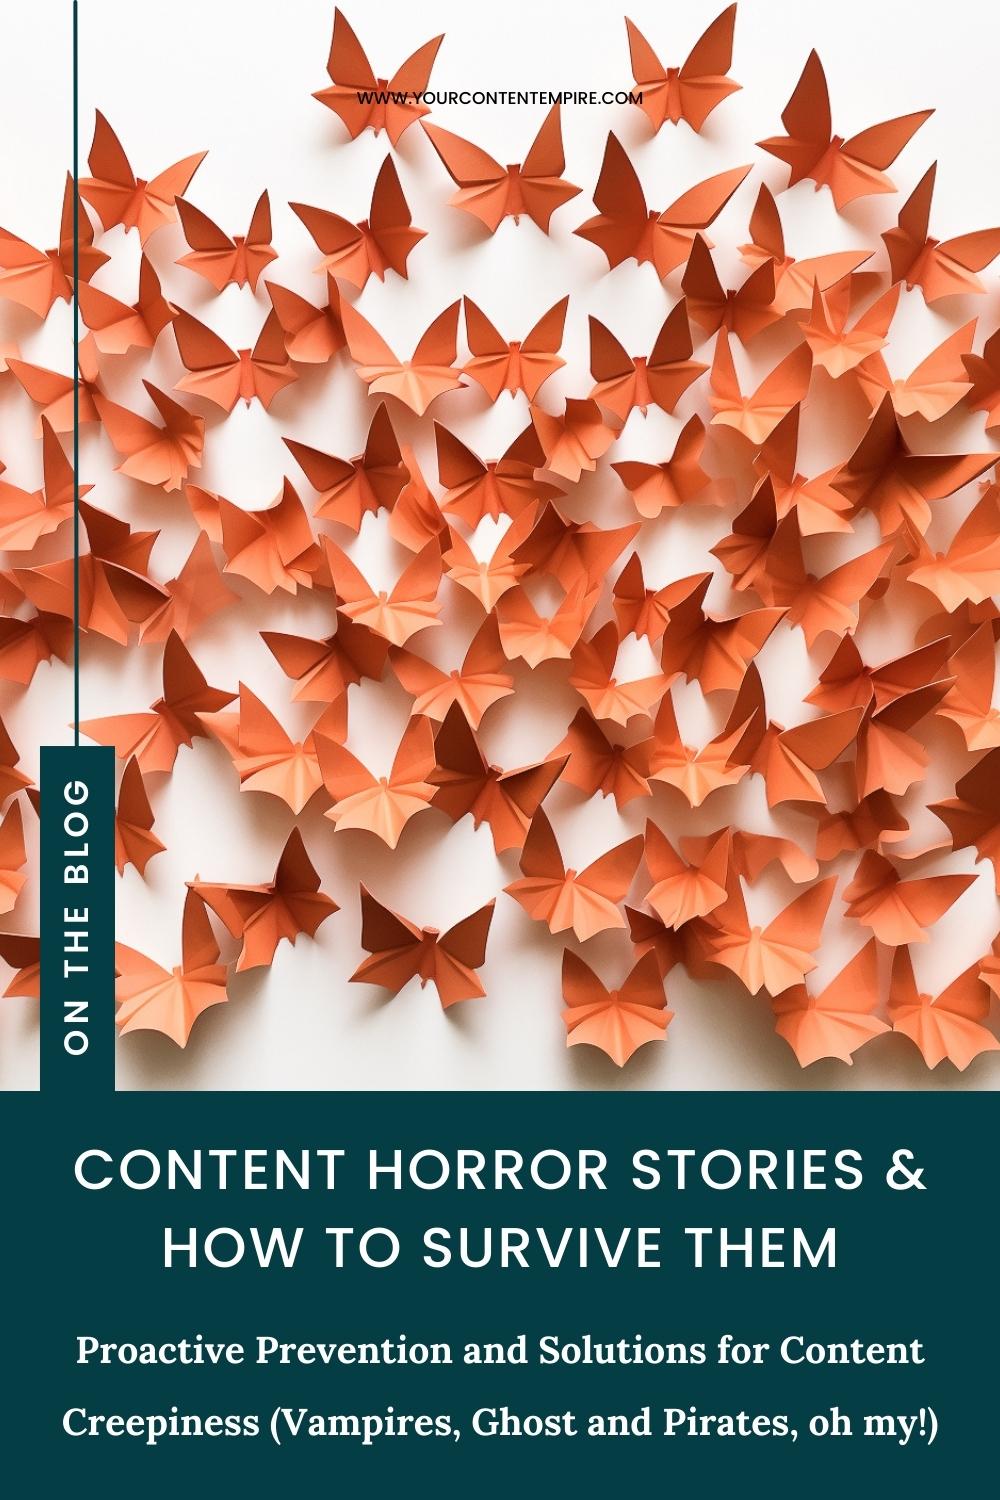 Content Horror Stories & How to Survive Them